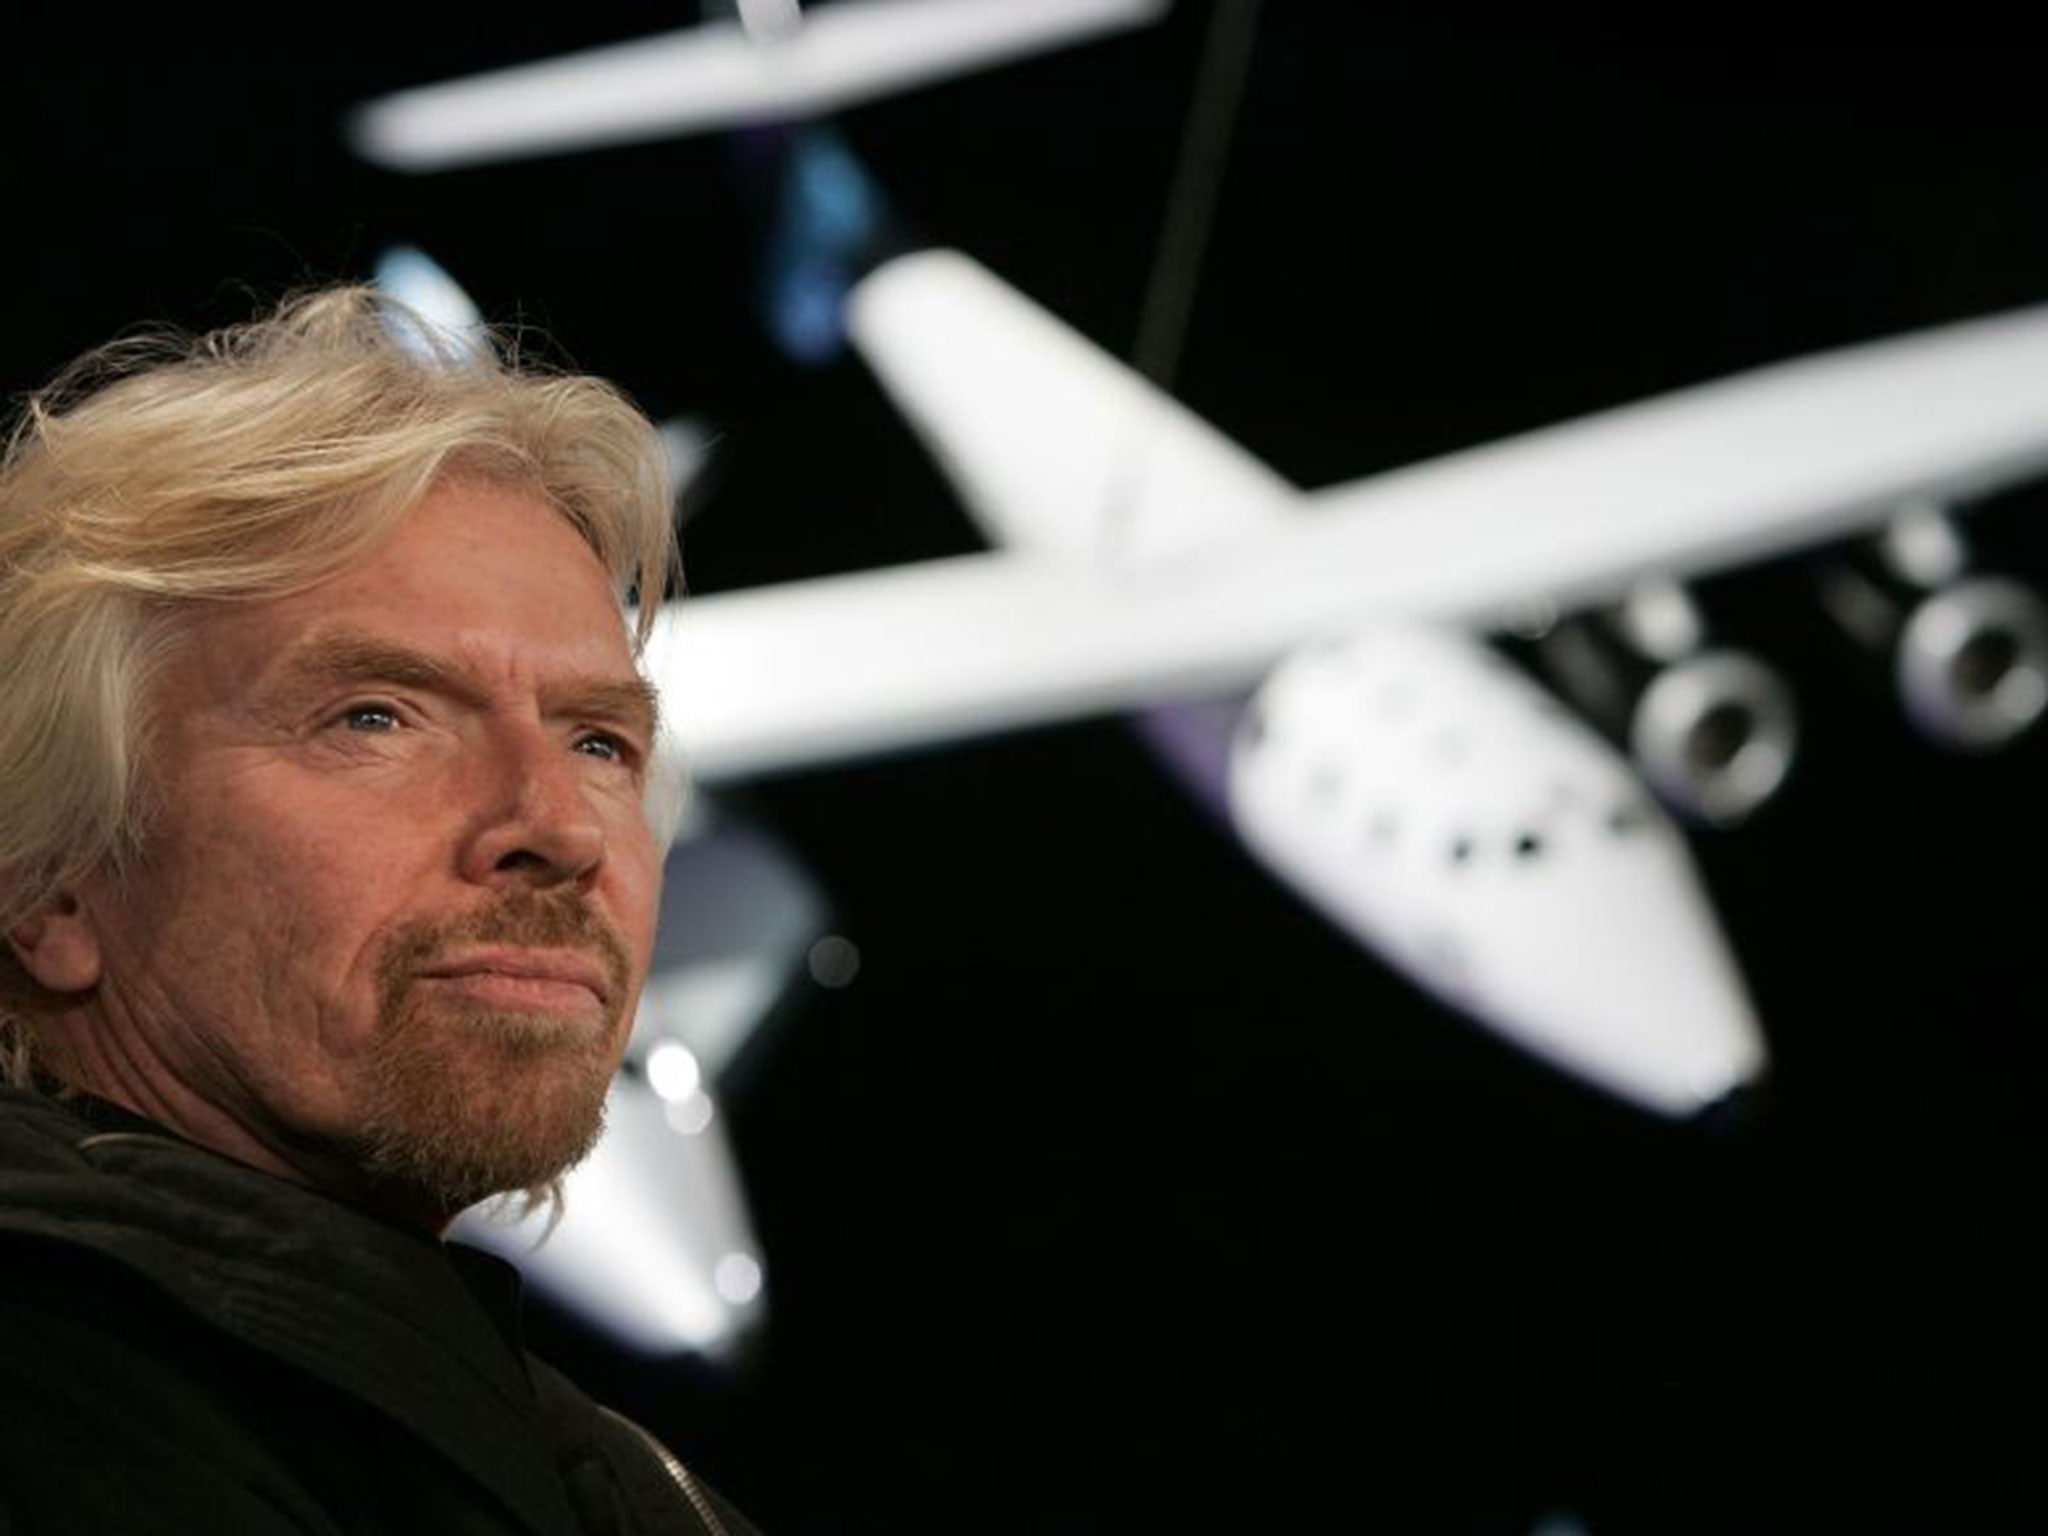 Sir Richard Branson, founder of Virgin Galactic, with a scale model of the Spaceship Two attached to the White Knight carrier aircraft in this January 2008 photograph